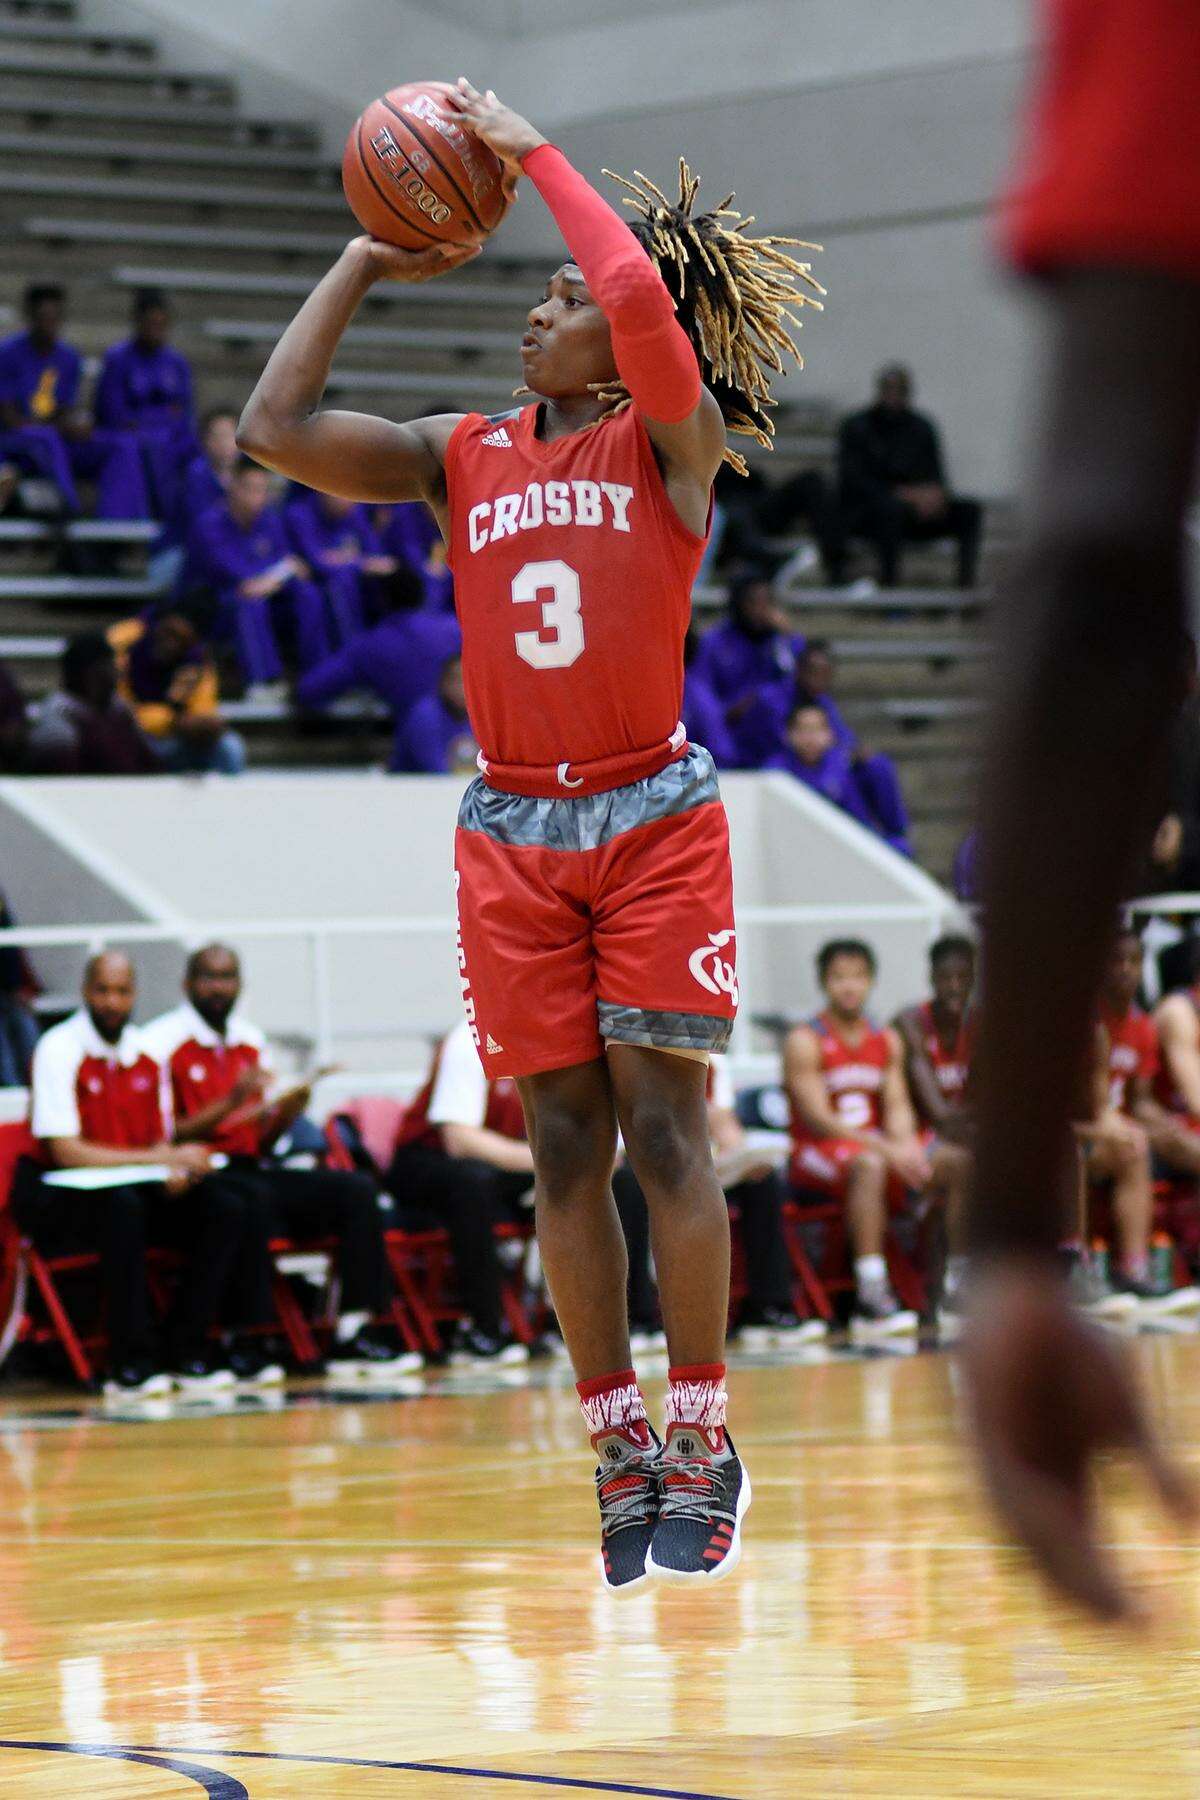 Crosby sophomore guard Deniquez Dunn gets off a three-point shot at the buzzer that was good against Barbers Hill in the 1st quarter of their Region III-5A Bi-District Playoff matchup at Phillips Fieldhouse in Pasadena on Feb. 19, 2019.